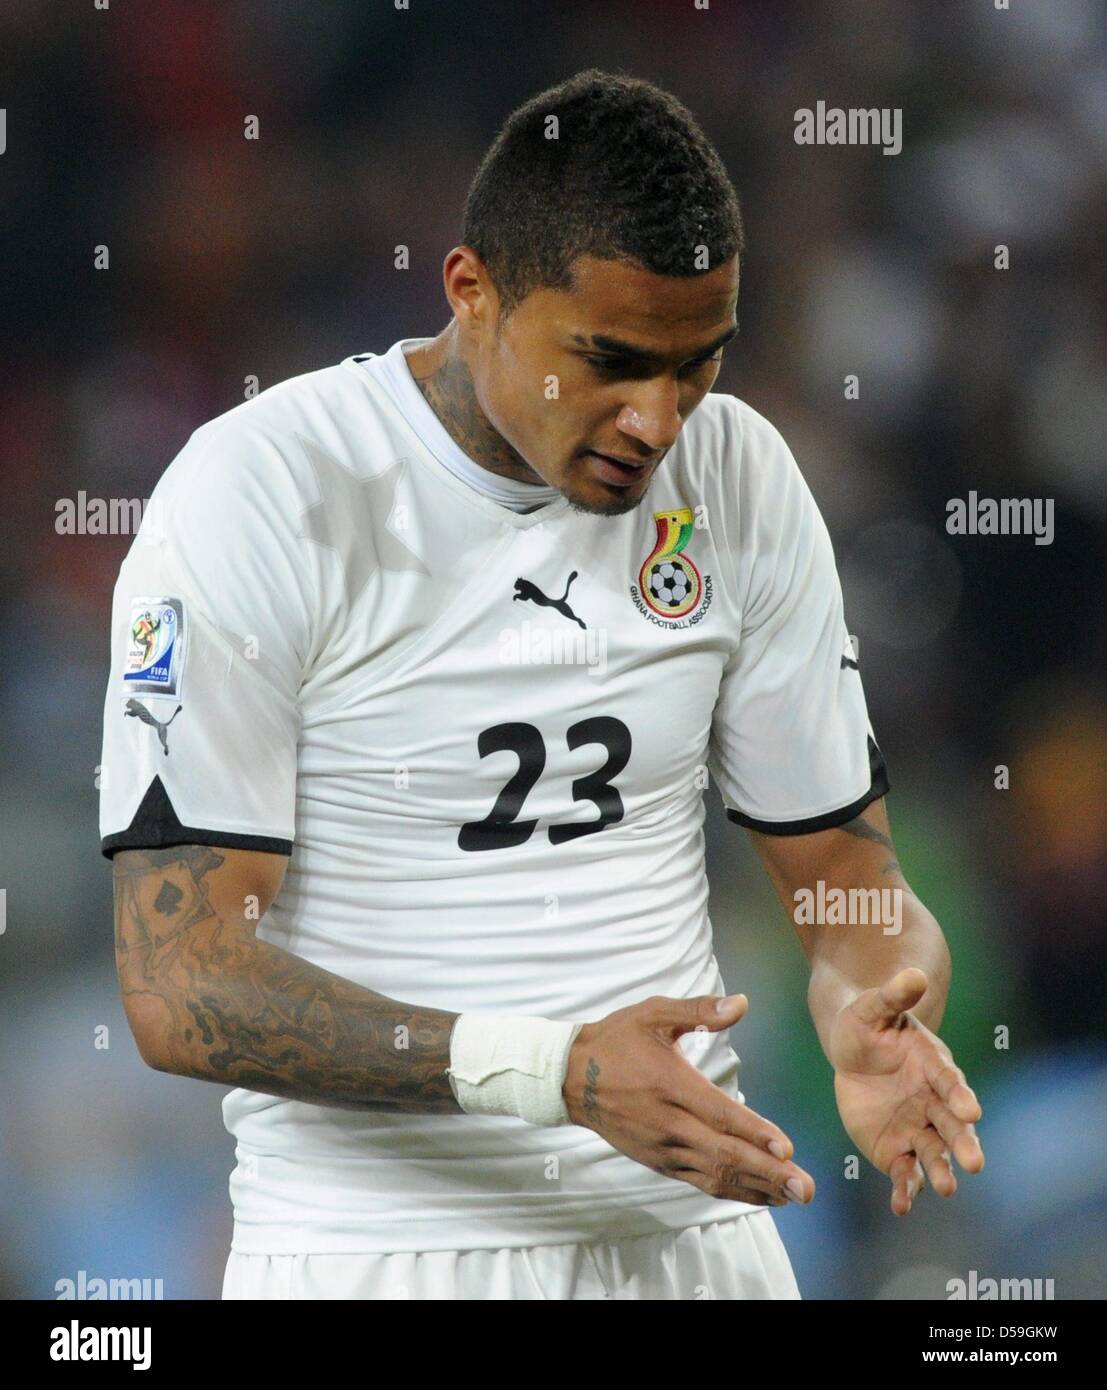 Ghana's Kevin-Prince Boateng reacts during the 2010 FIFA World Cup group D match between Ghana and Germany at Soccer City, Johannesburg, South Africa 23 June 2010. Photo: Marcus Brandt dpa - Please refer to http://dpaq.de/FIFA-WM2010-TC Stock Photo